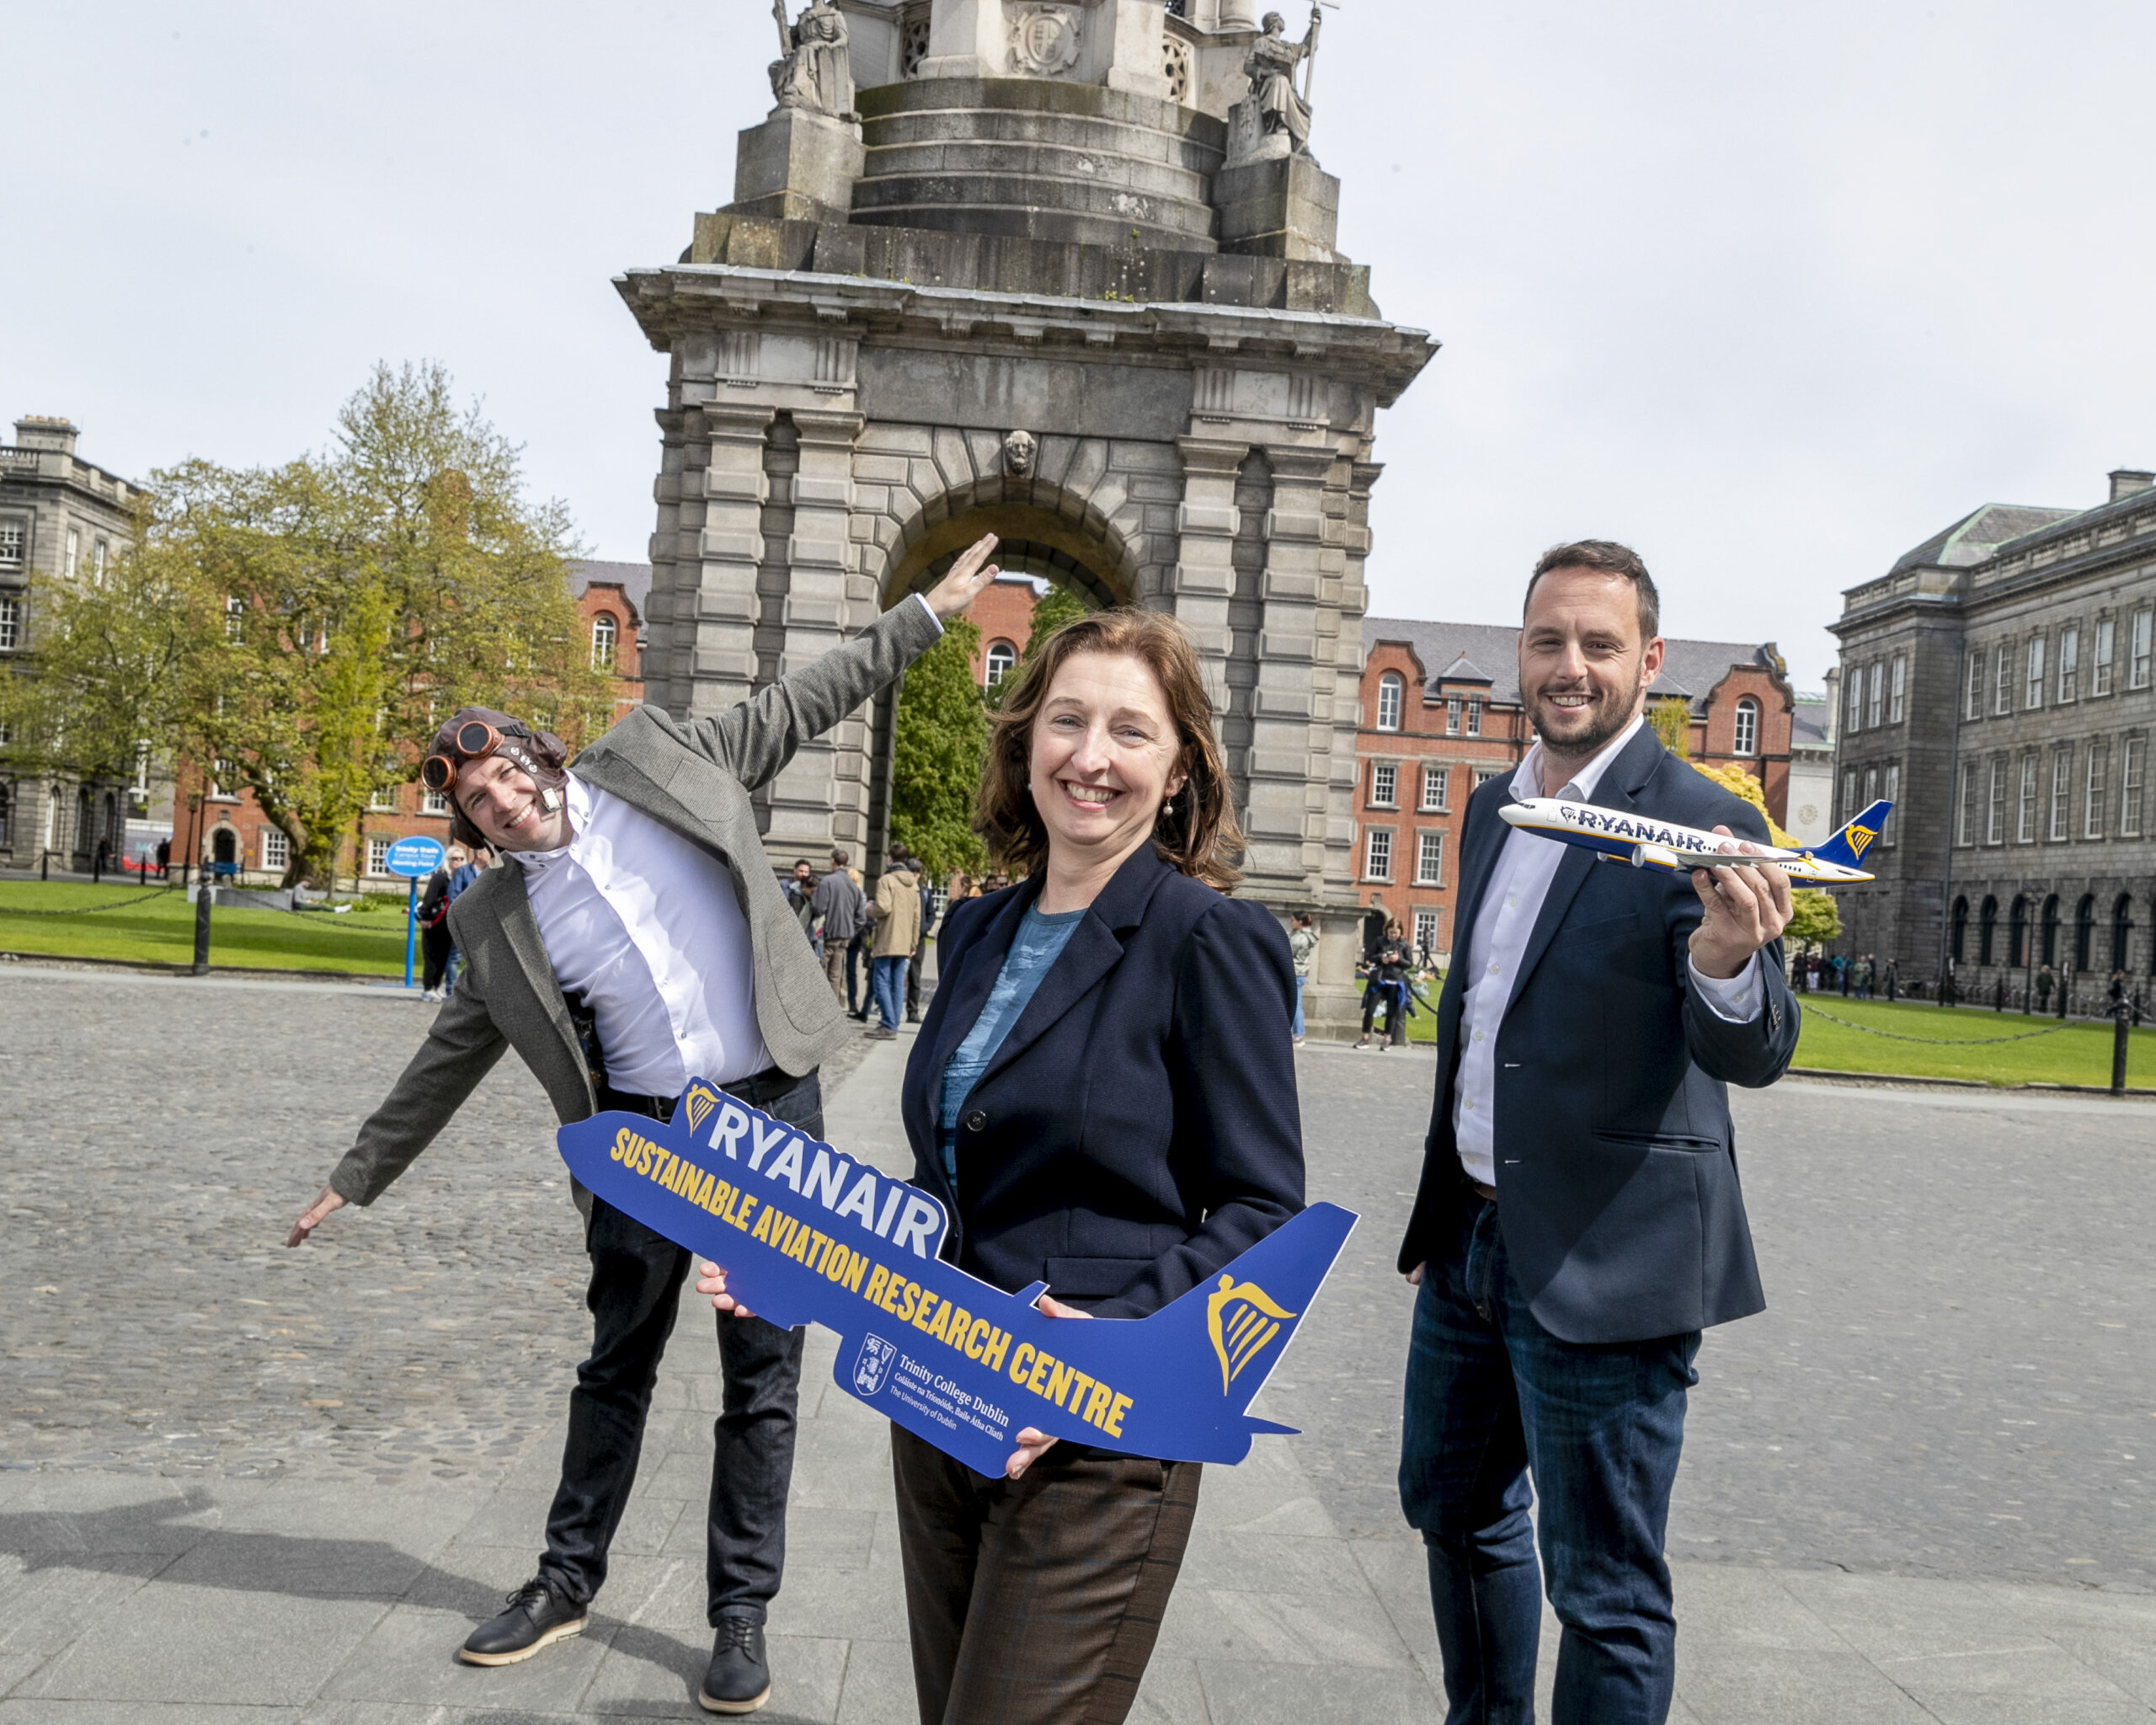 RYANAIR EXTENDS TRINITY COLLEGE DUBLIN PARTNERSHIP TO 2030 & DONATES FURTHER €2.5M TO SUSTAINABLE AVIATION RESEARCH